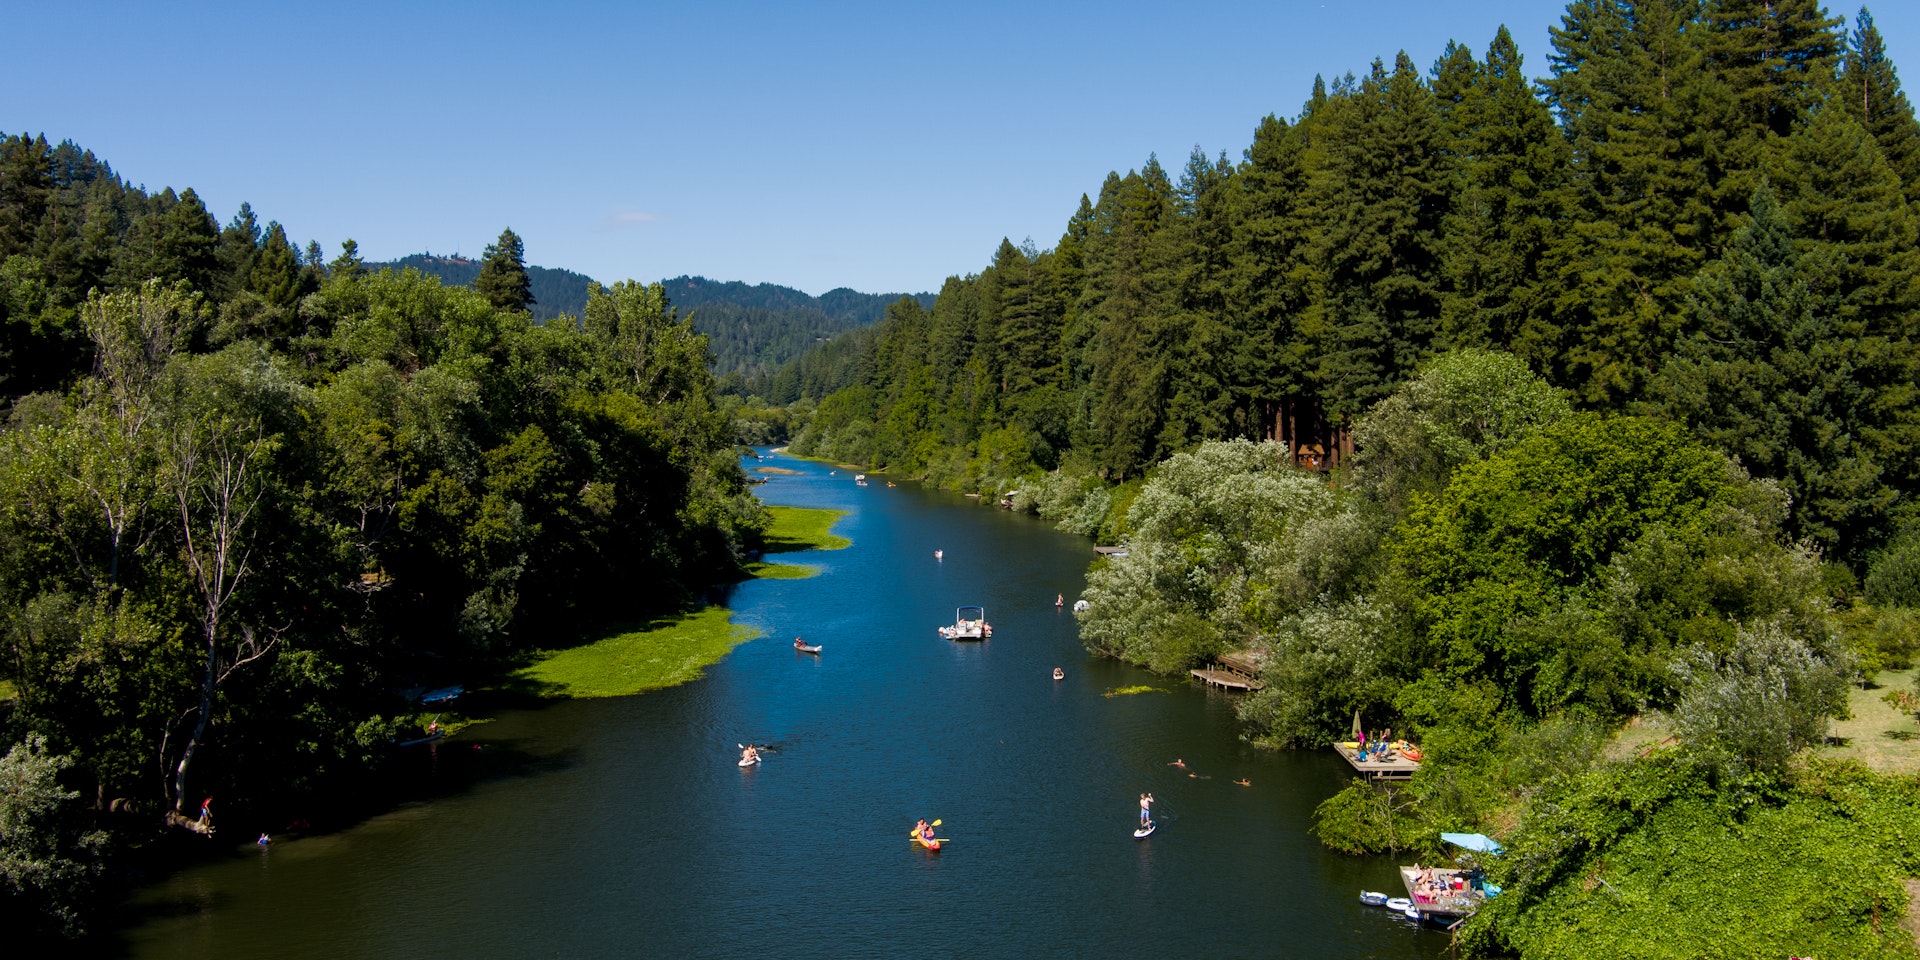 Kayaks, canoes and other water craft in the Russian River, near Guerneville, Sonoma County, California, USA